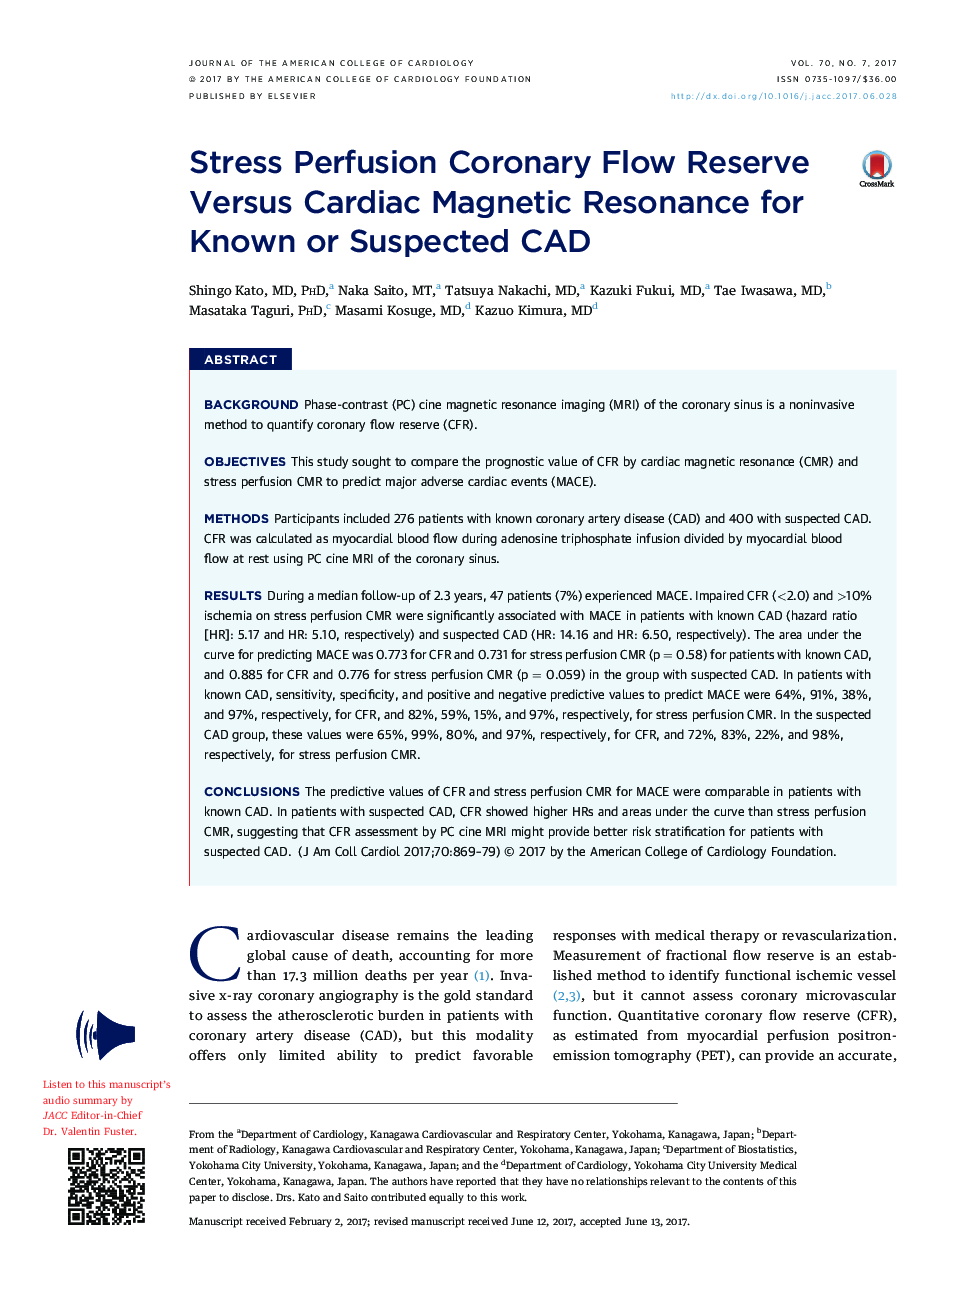 Stress Perfusion Coronary Flow Reserve Versus Cardiac Magnetic Resonance for KnownÂ orÂ Suspected CAD